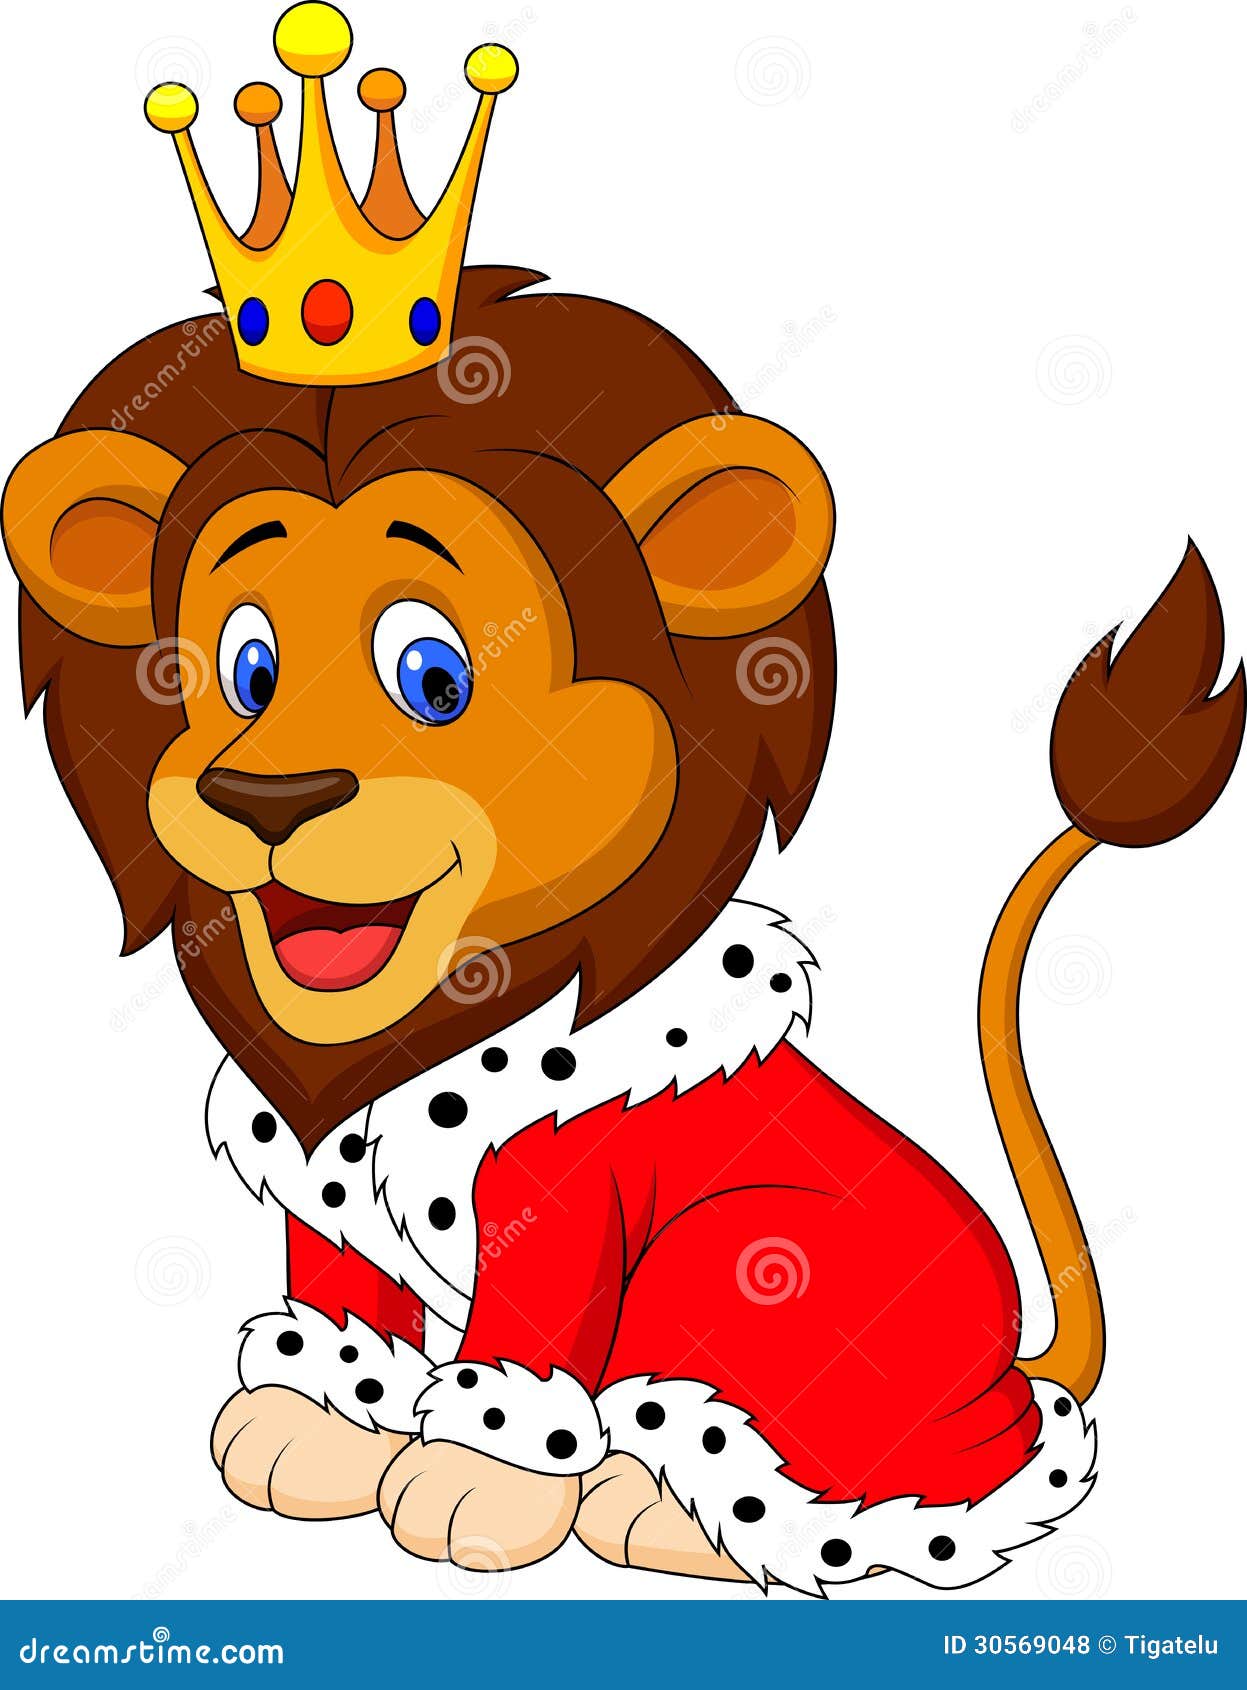 Cartoon Lion King Outfit Stock Illustrations – 9 Cartoon Lion King Outfit  Stock Illustrations, Vectors & Clipart - Dreamstime